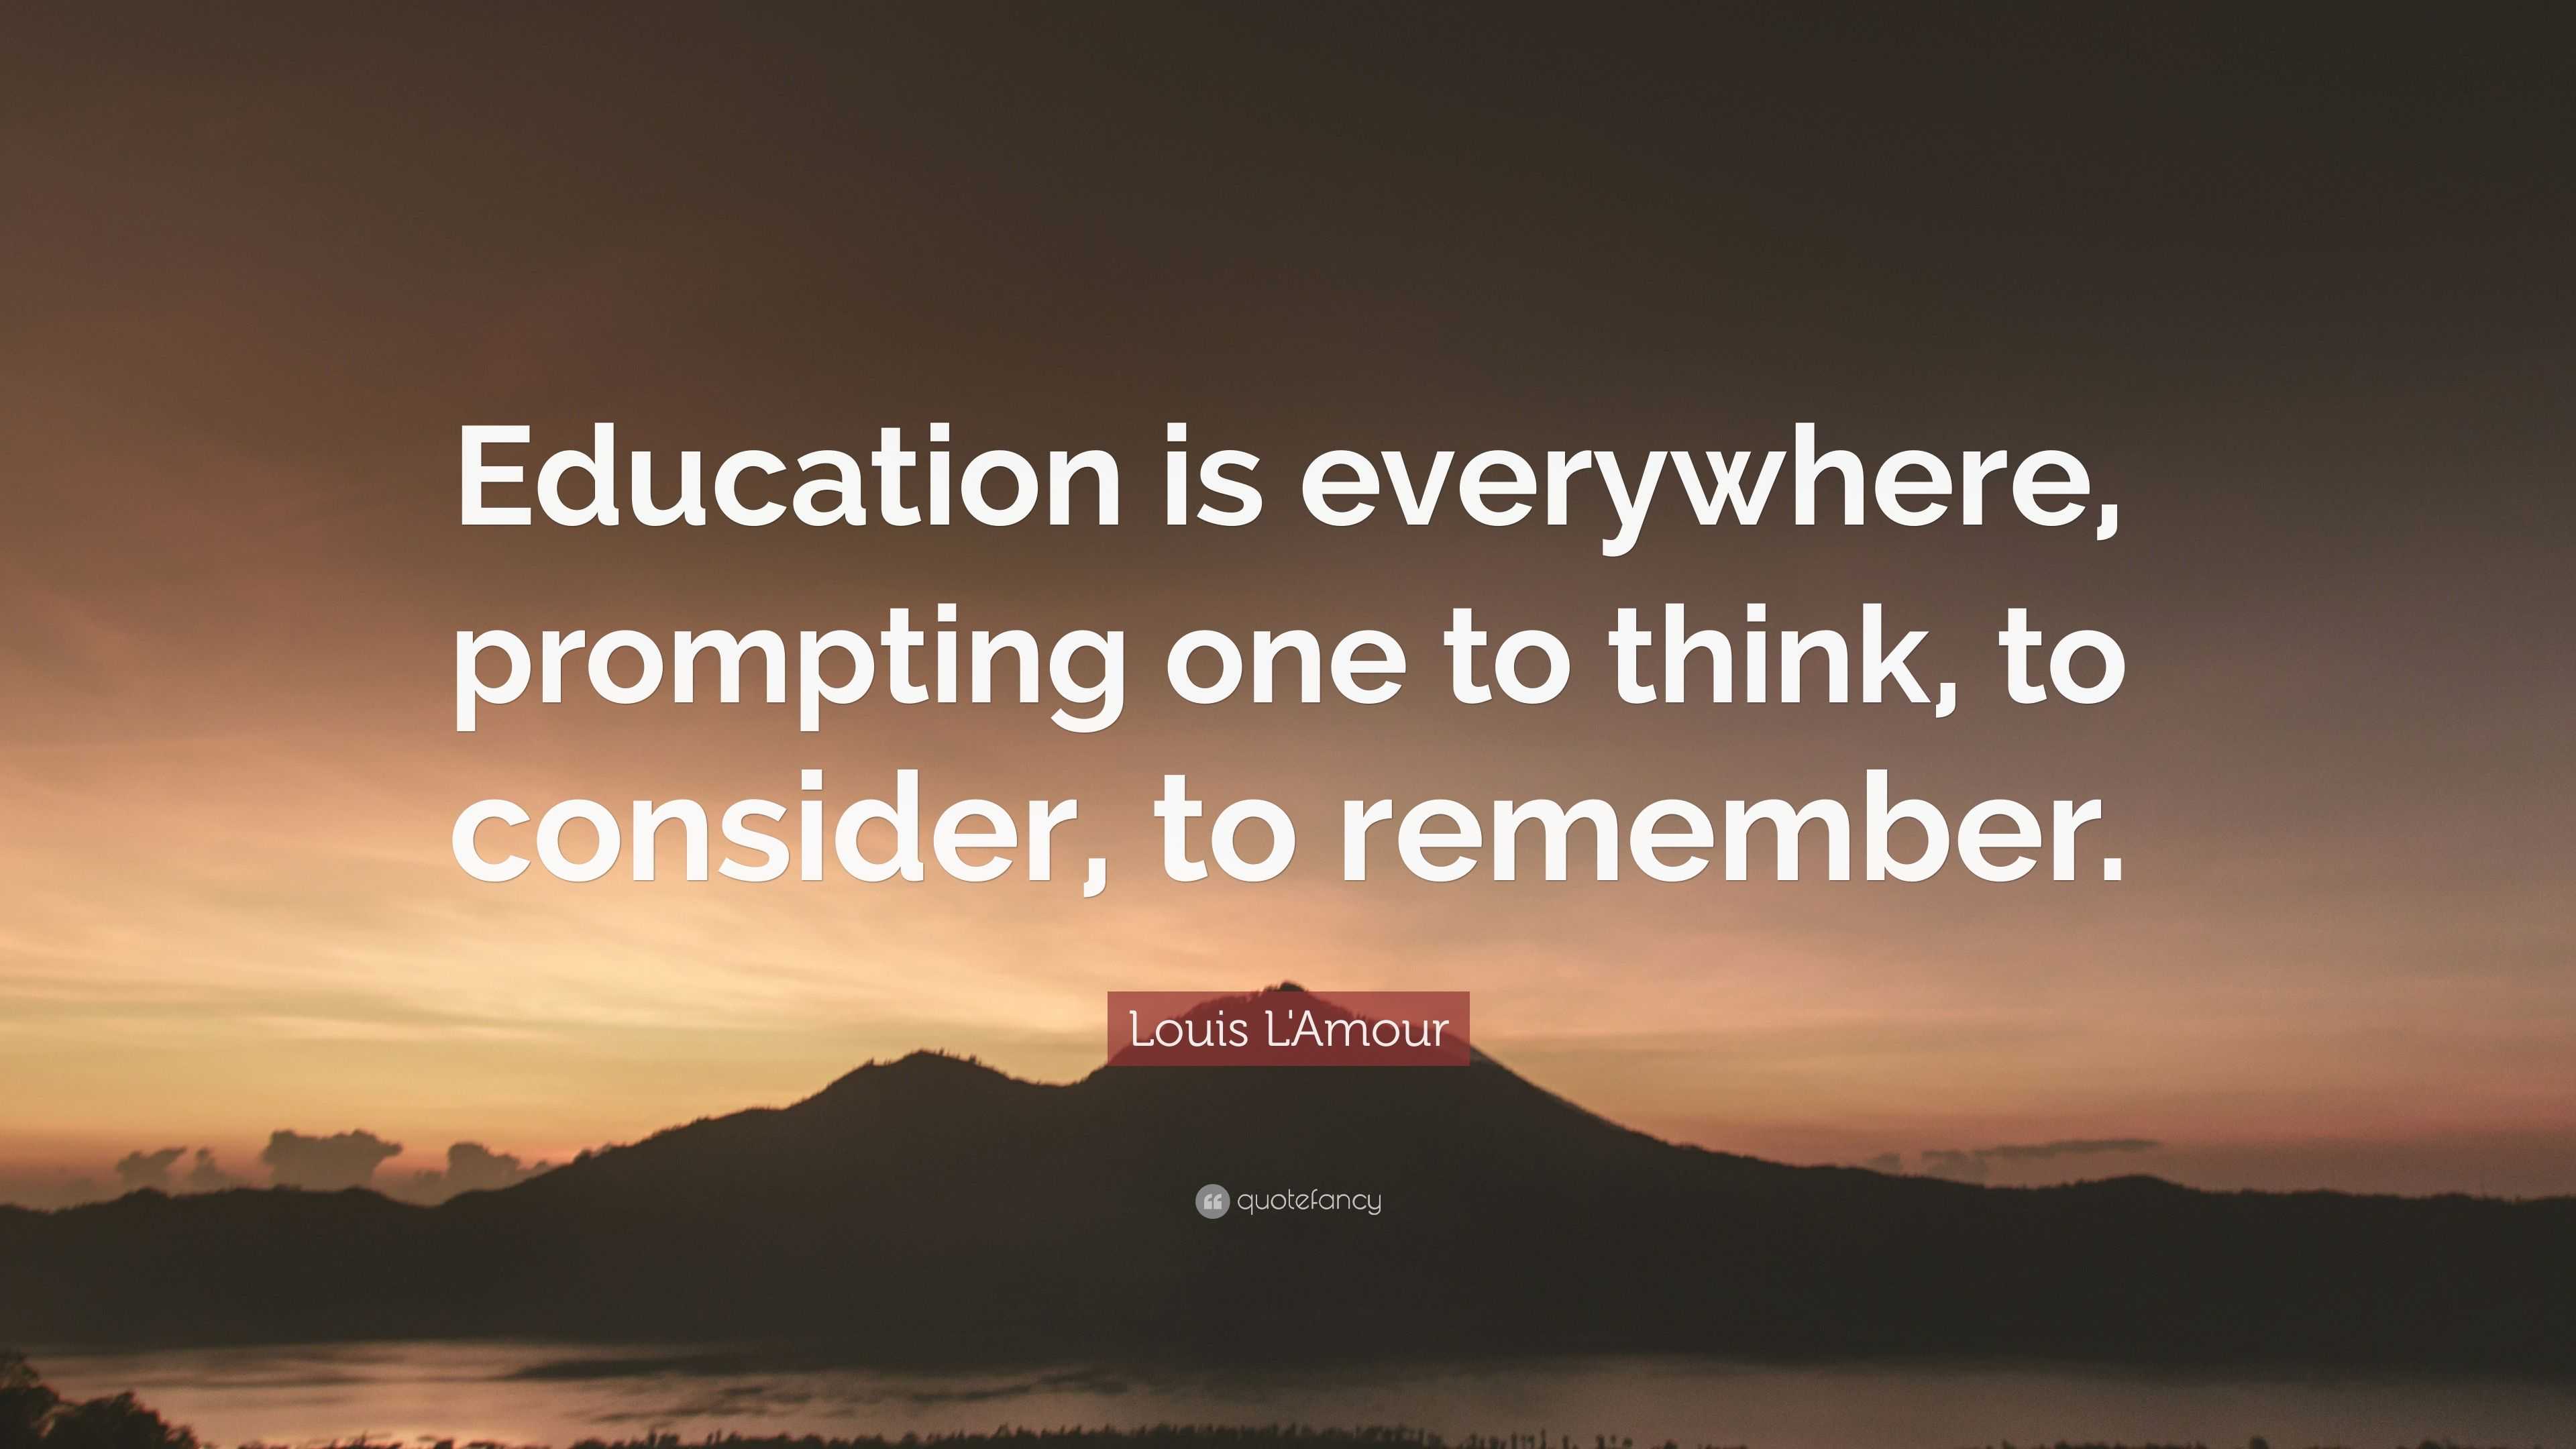 Louis L'Amour Quote: “Education is everywhere, prompting one to think ...